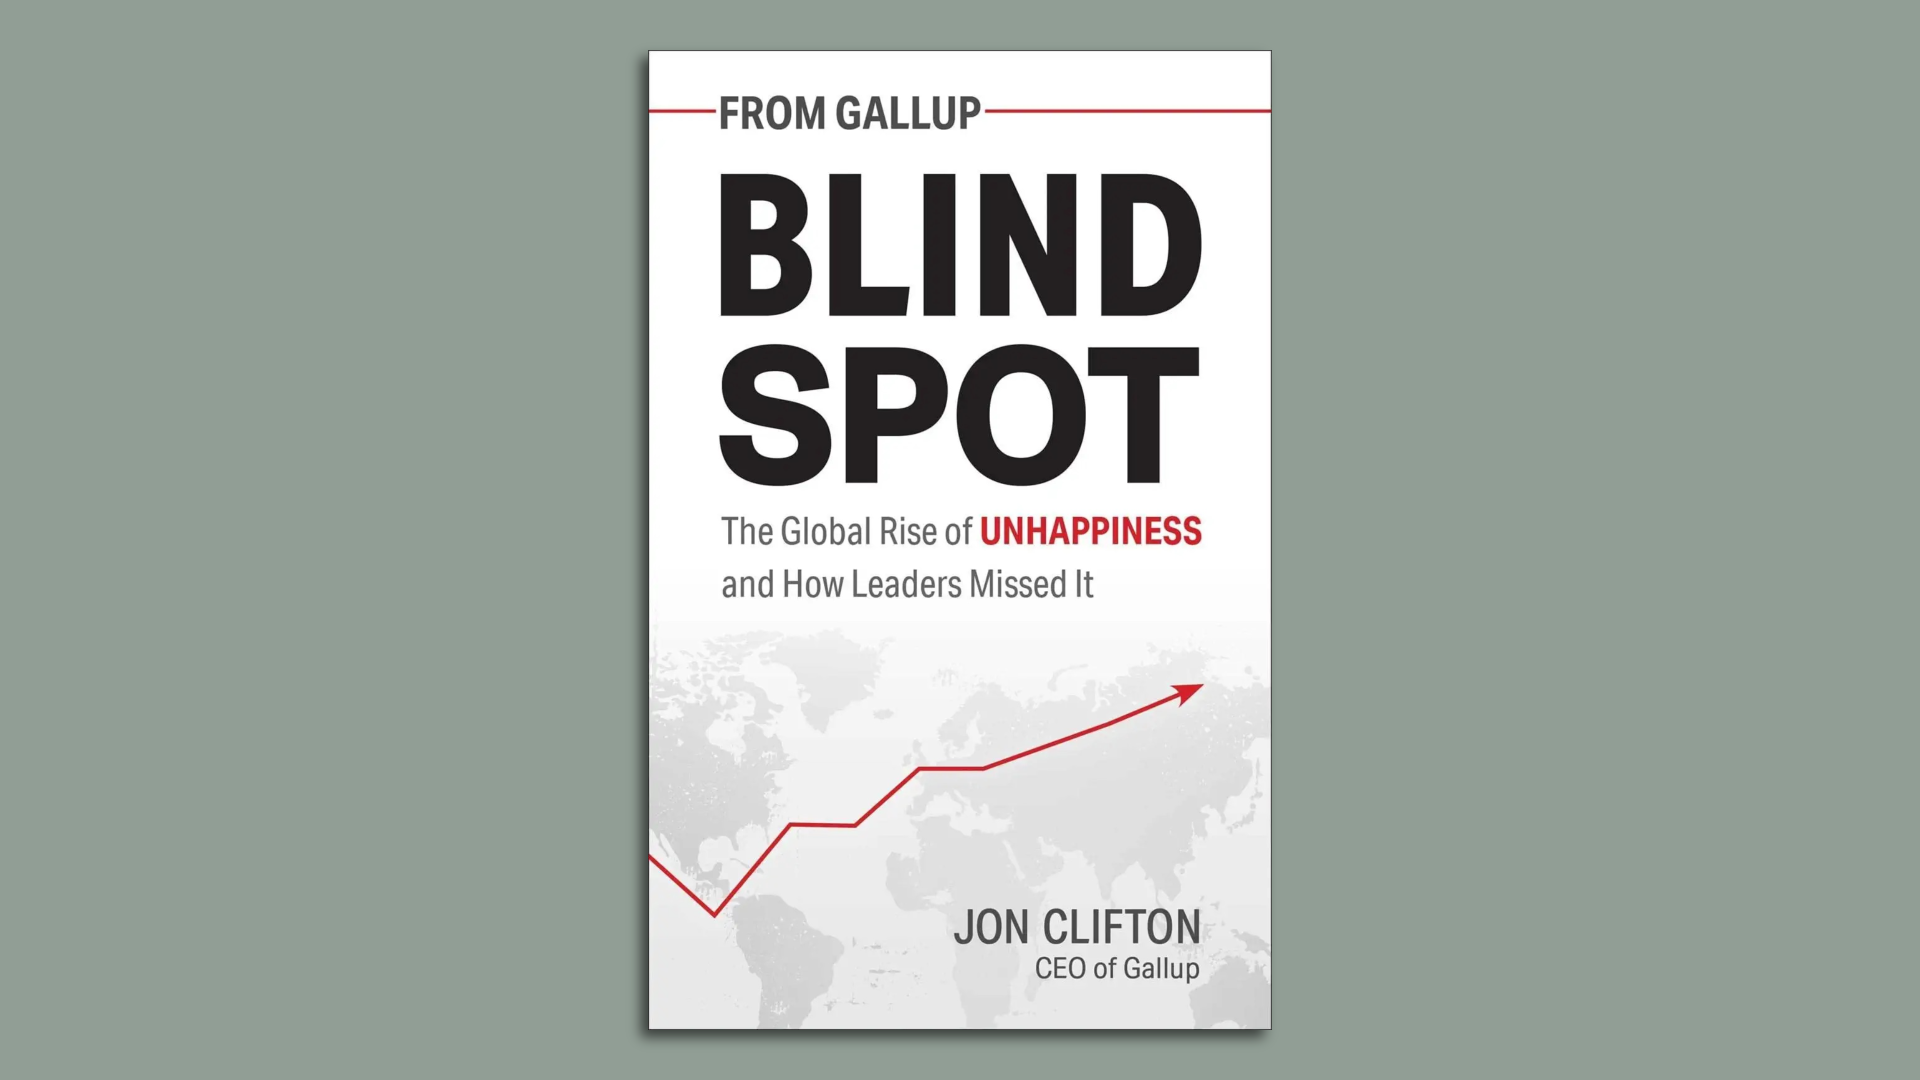 The Cover of "Blind Spot" from Gallup